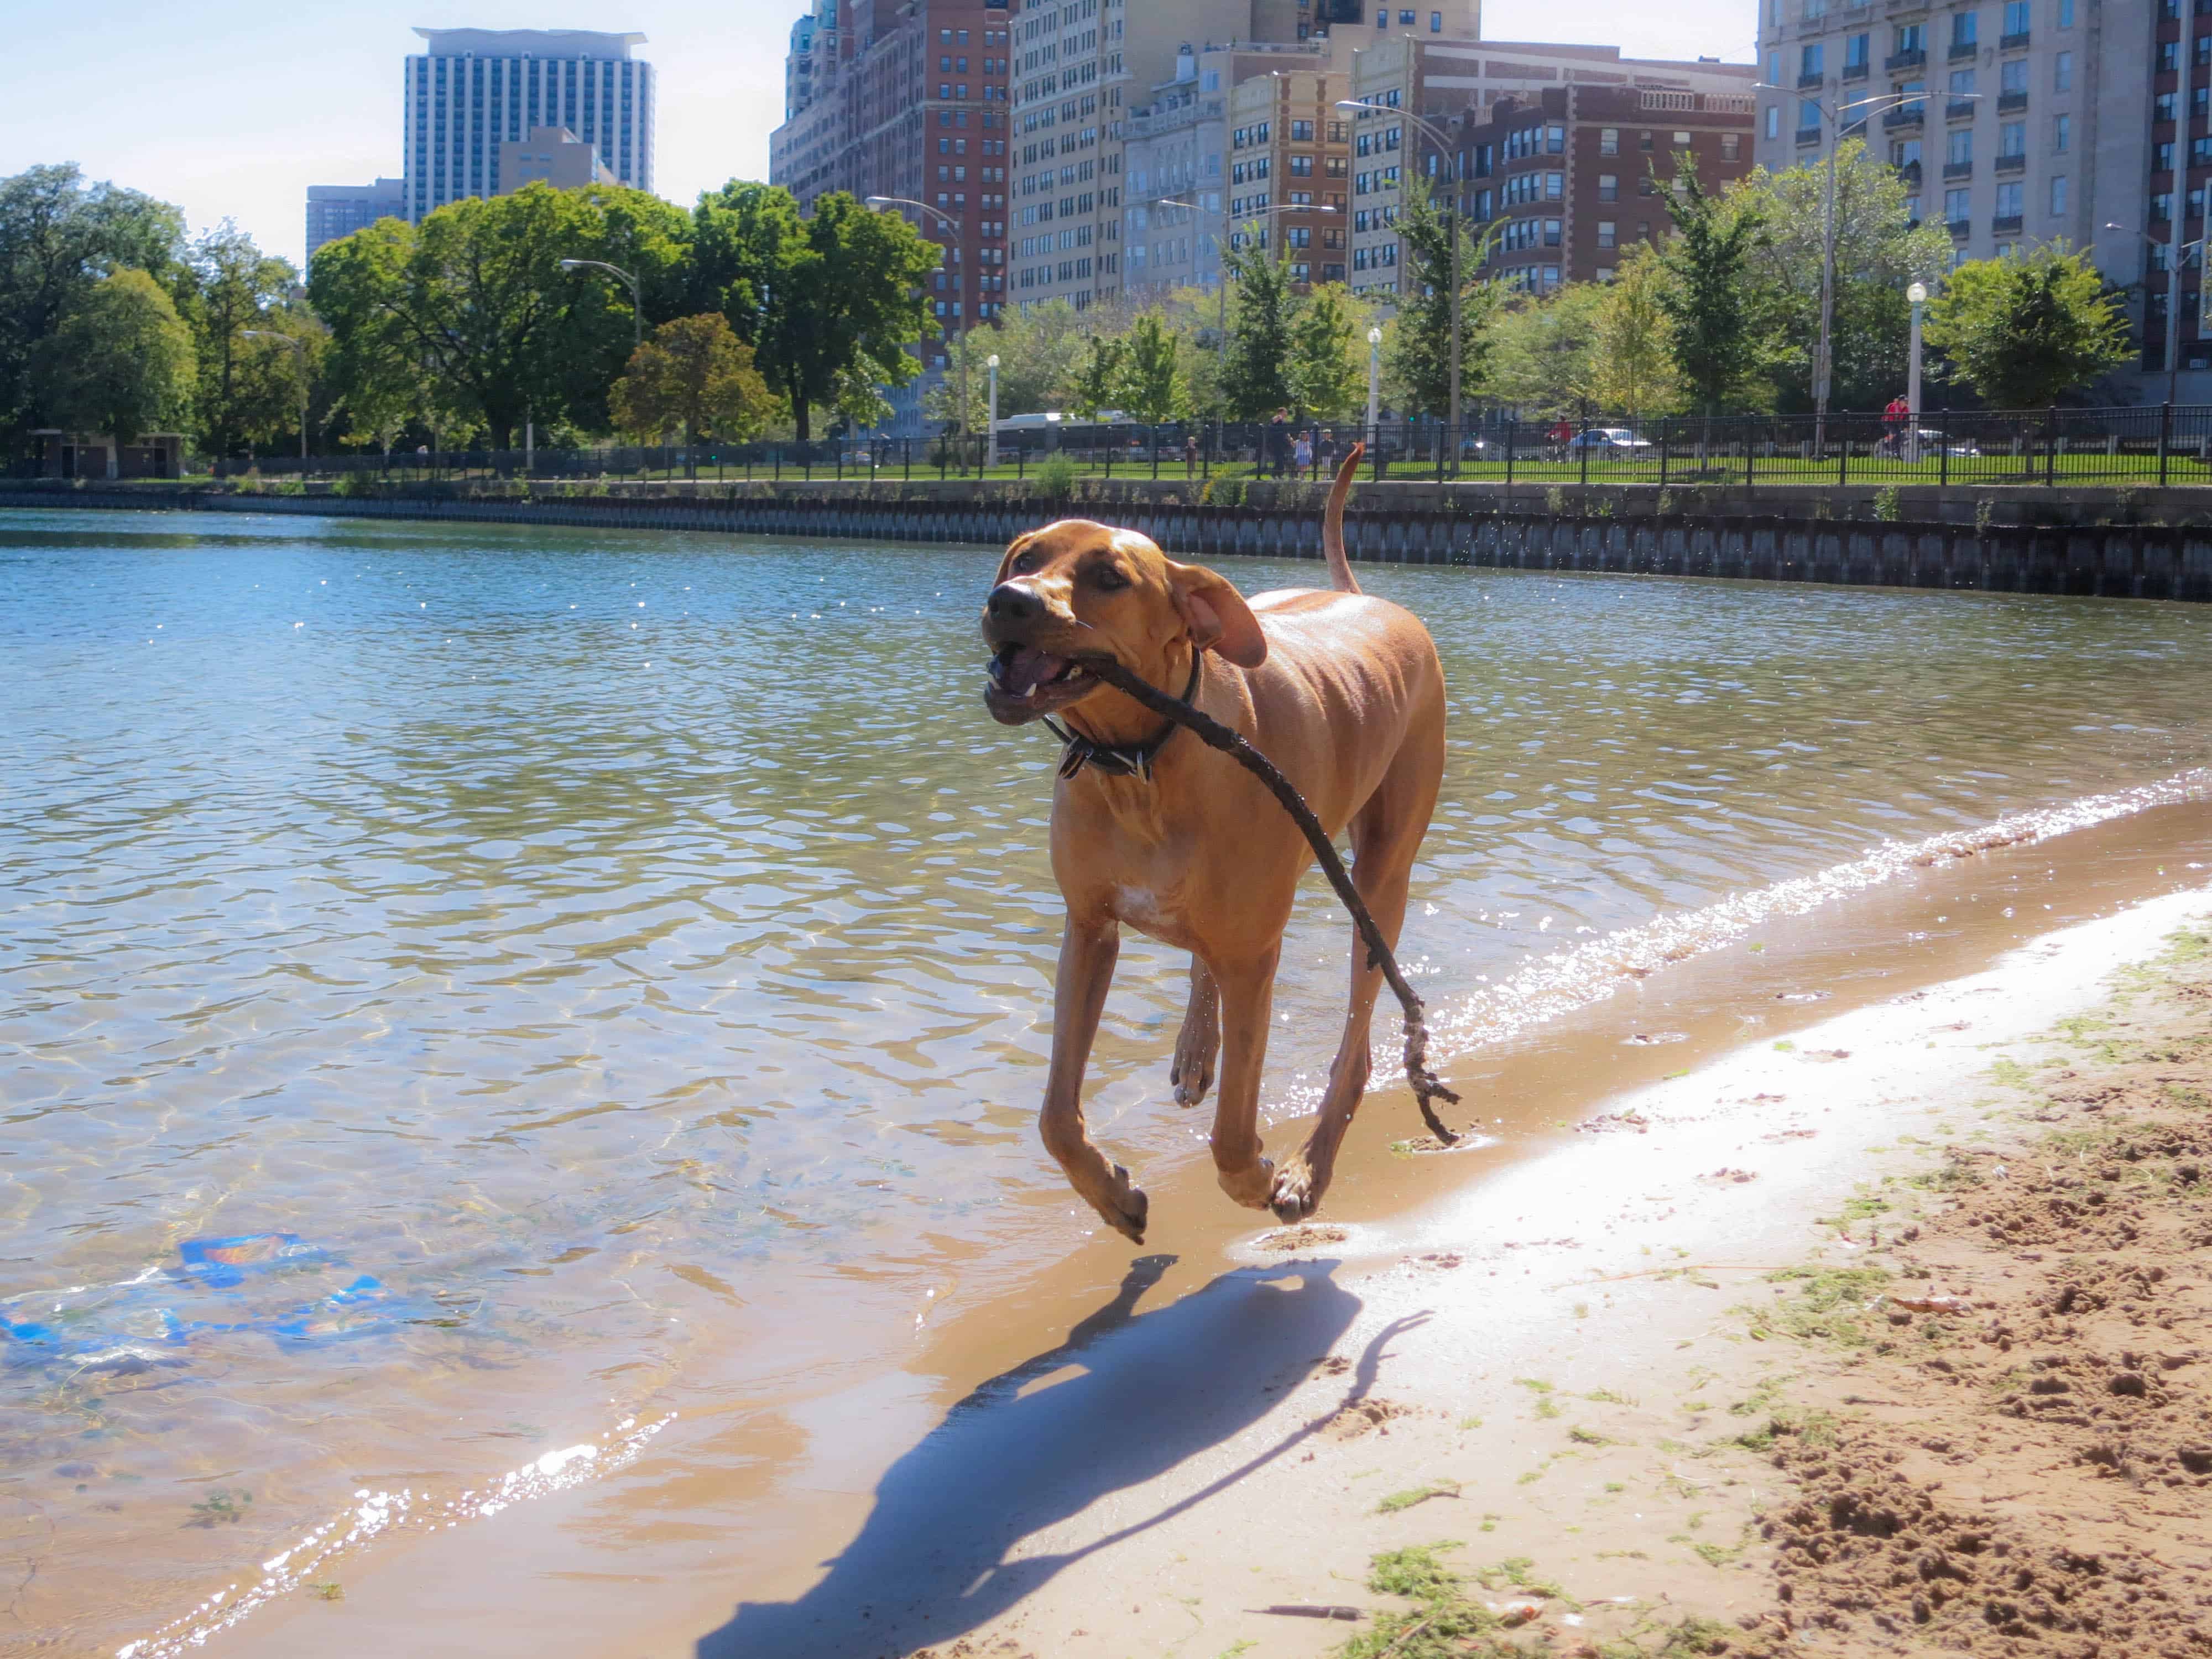 Rhodesian Ridgeback, adventure, marking our territory, dogs, petcentric